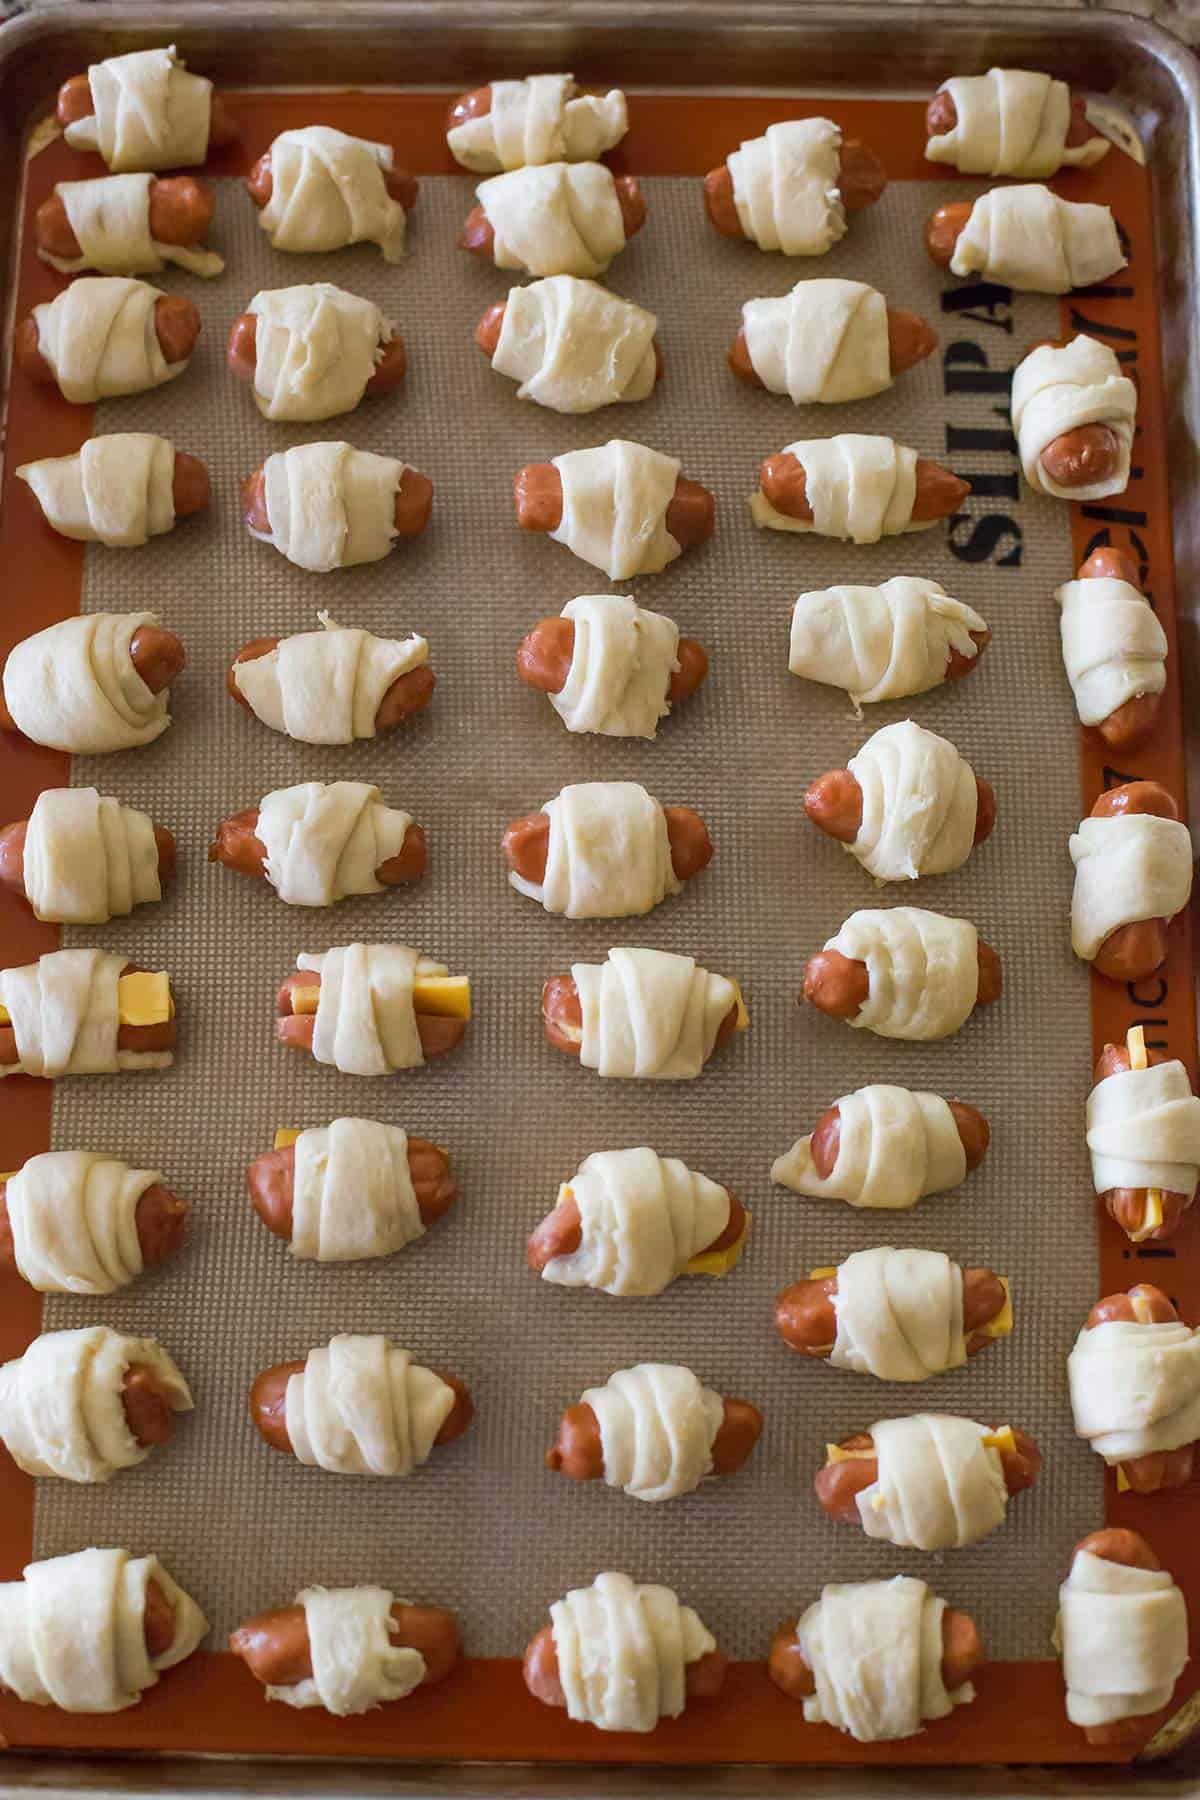 Assembled pigs in a blanket on a baking sheet.